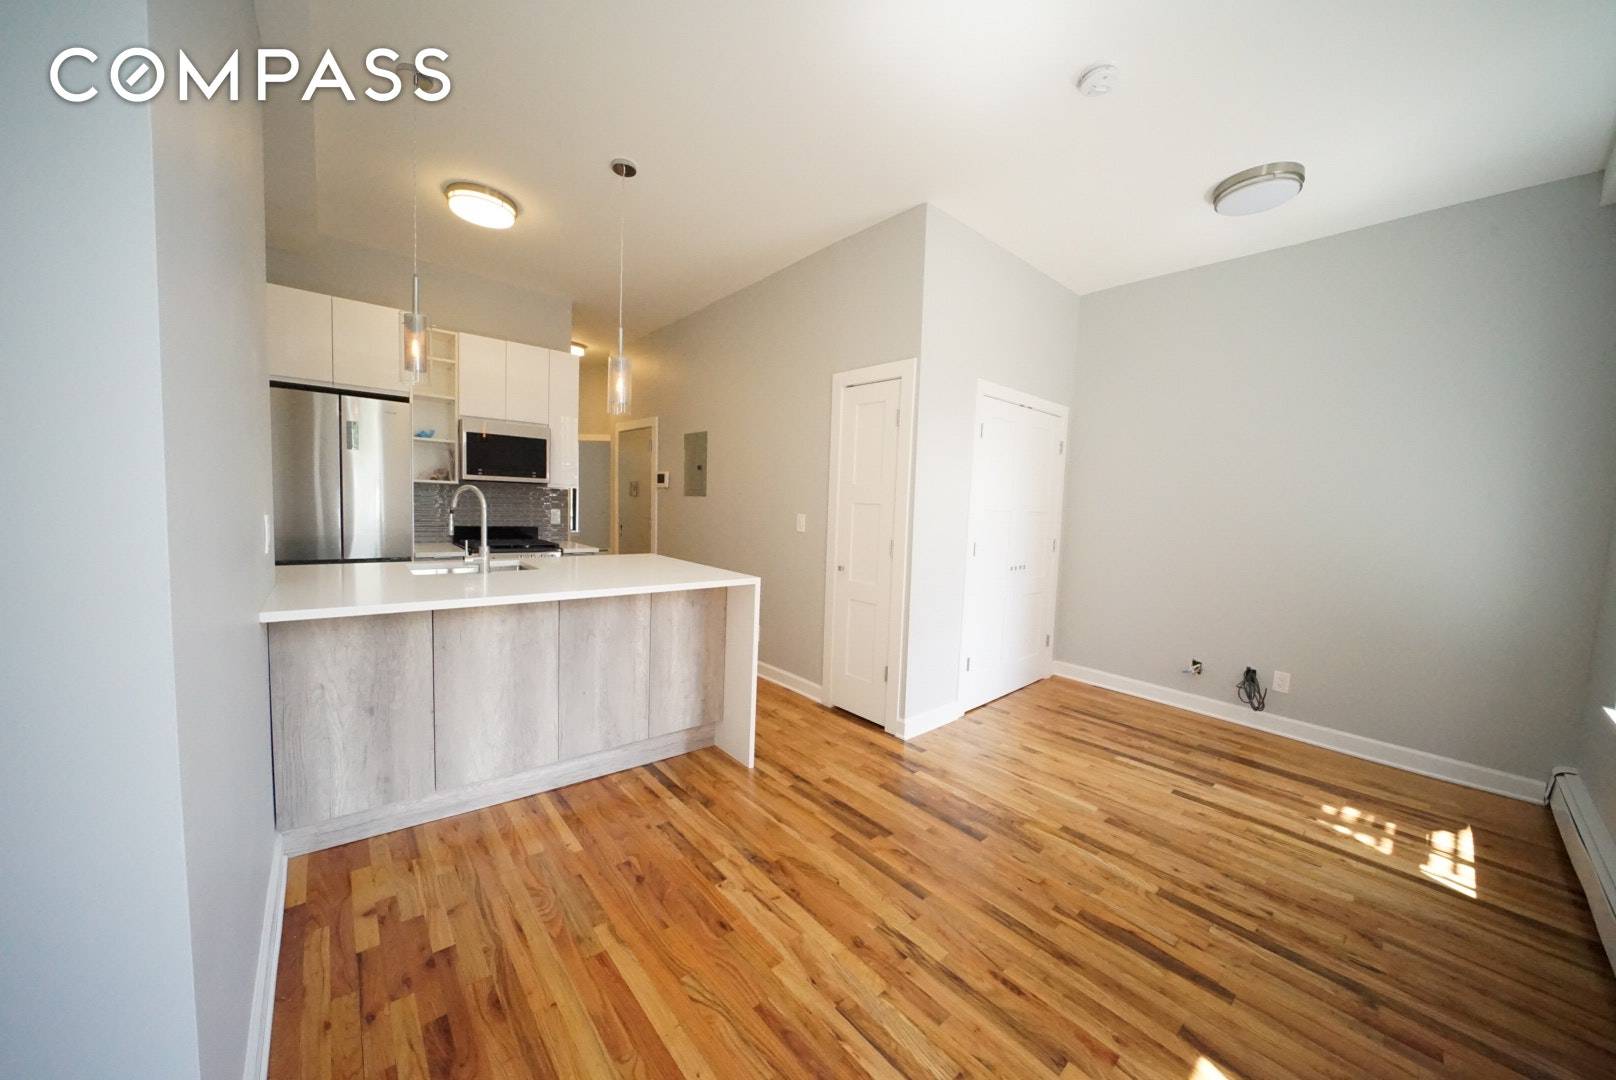 572 Myrtle Avenue is a brand new renovation featuring custom kitchen with huge quartz island and breakfast bar, stainless steel appliance package including dishwasher, and custom details throughout.